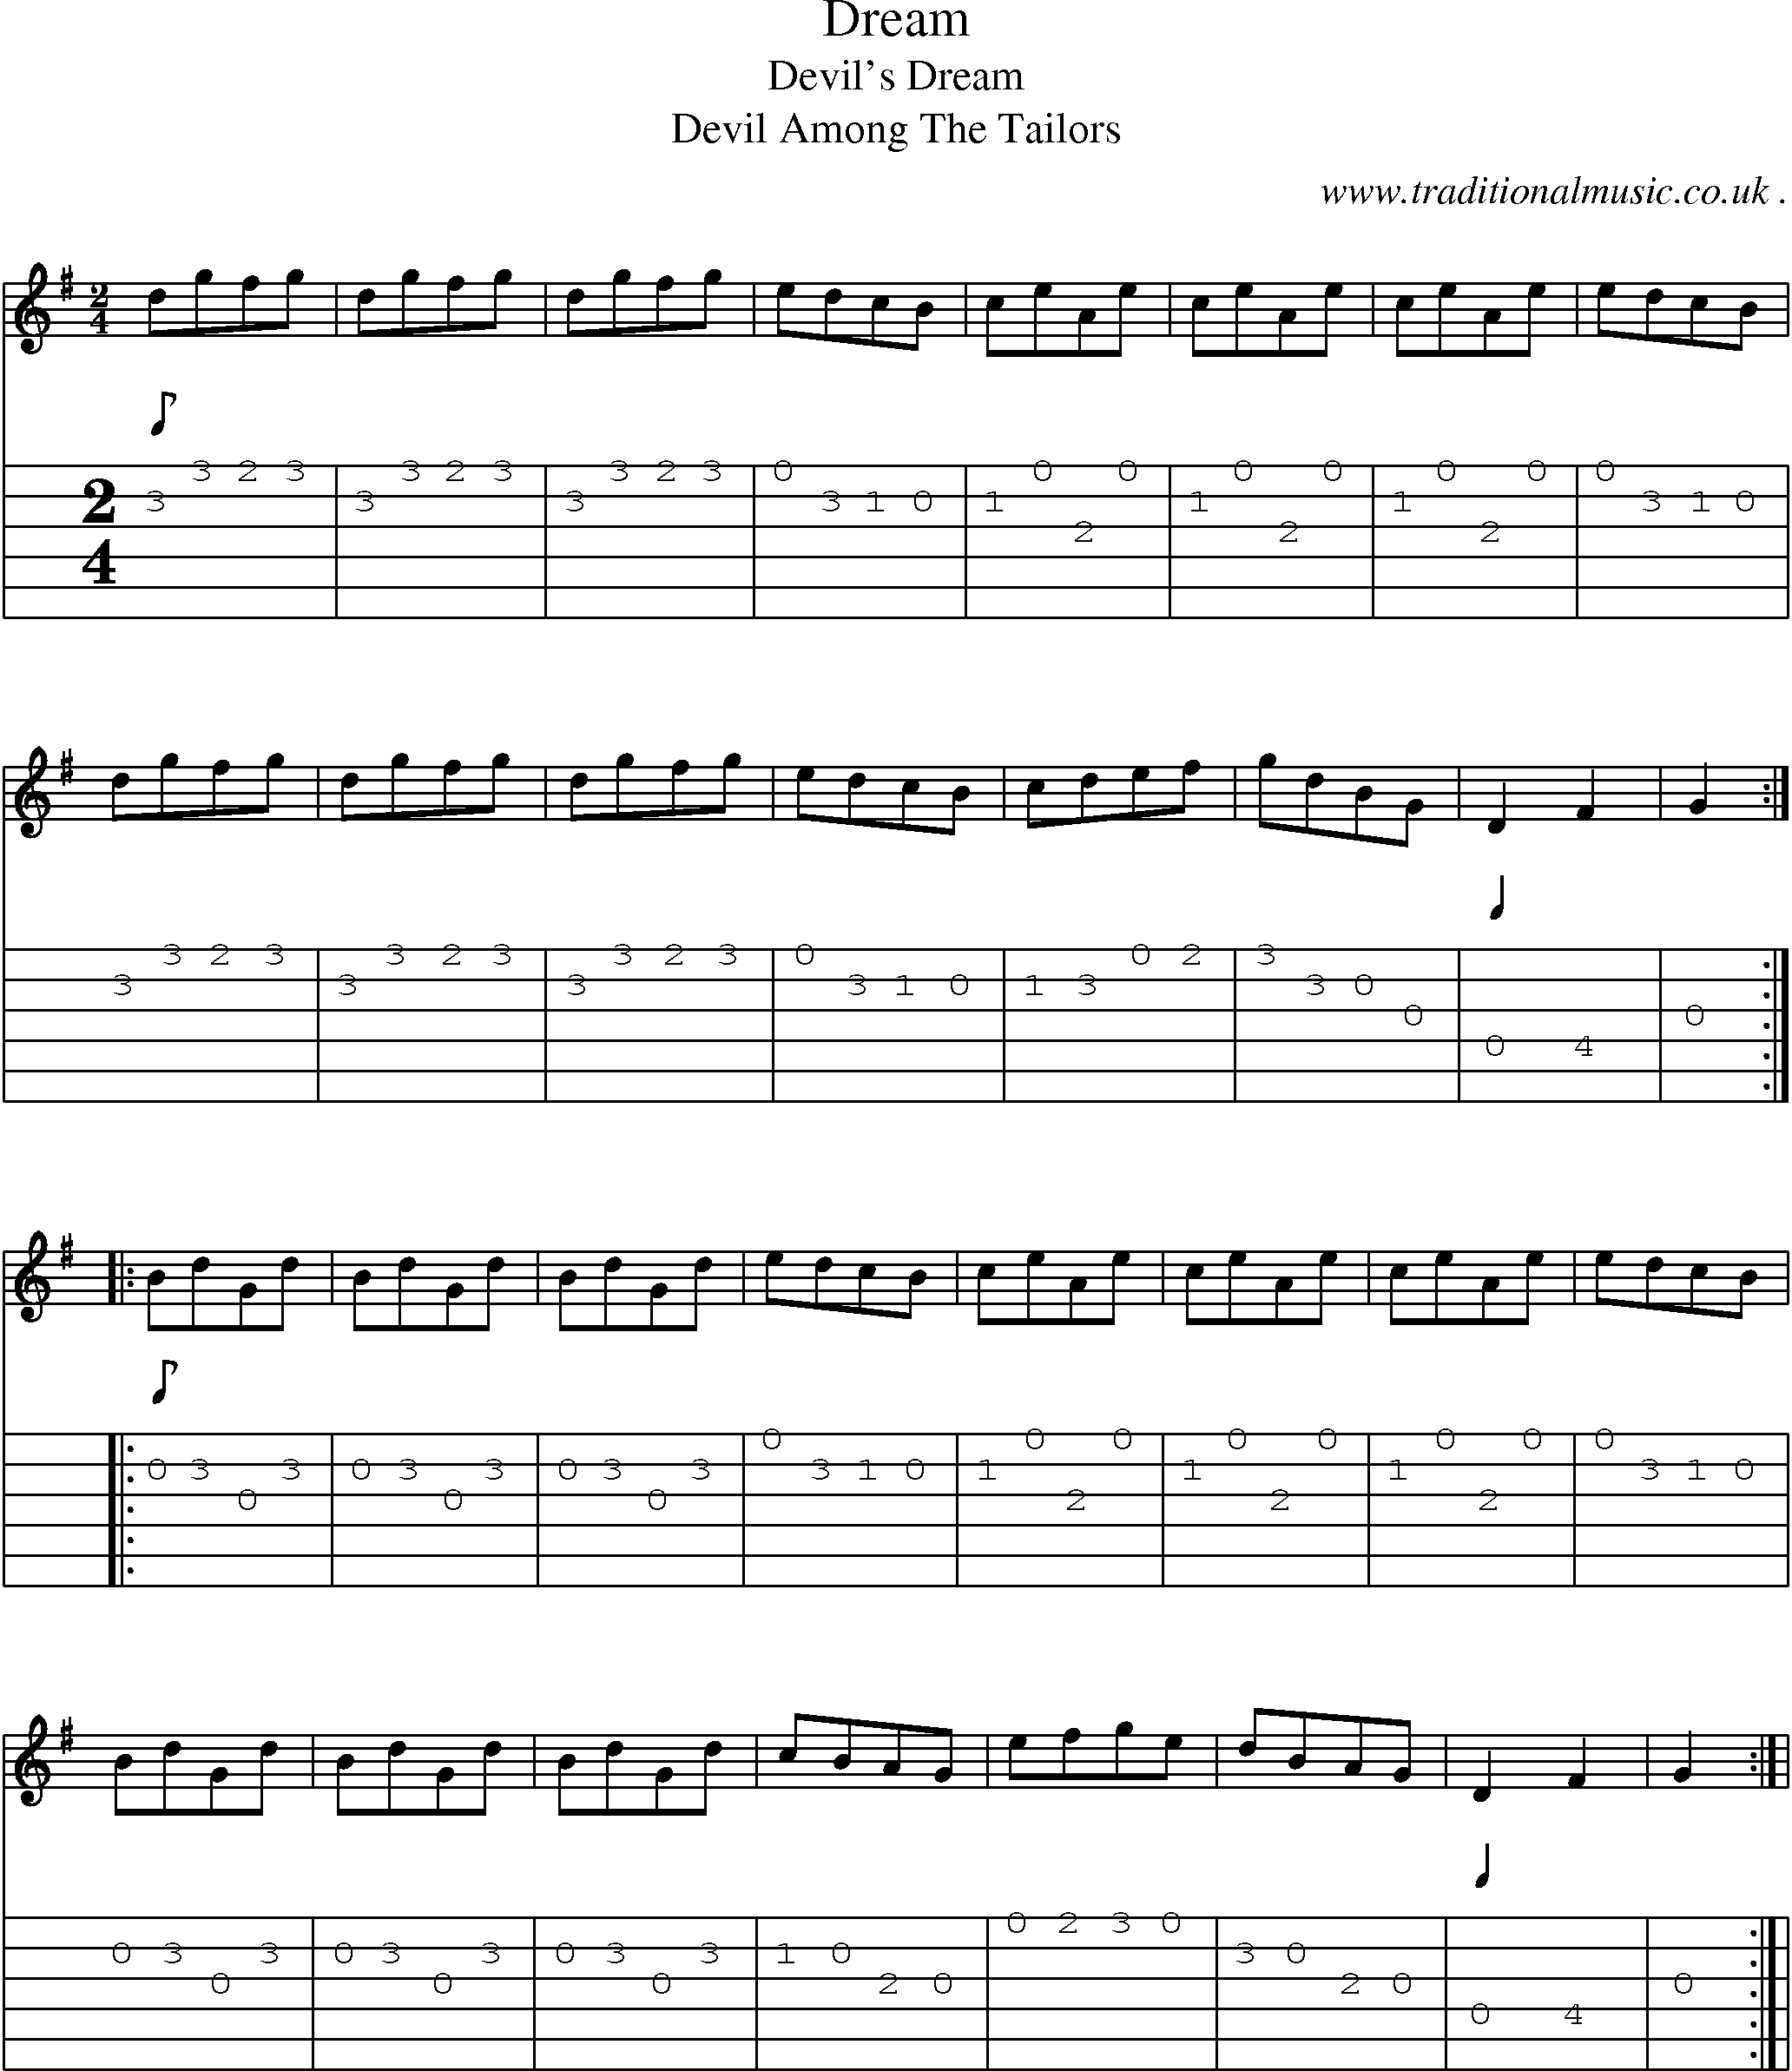 Sheet-Music and Guitar Tabs for Dream